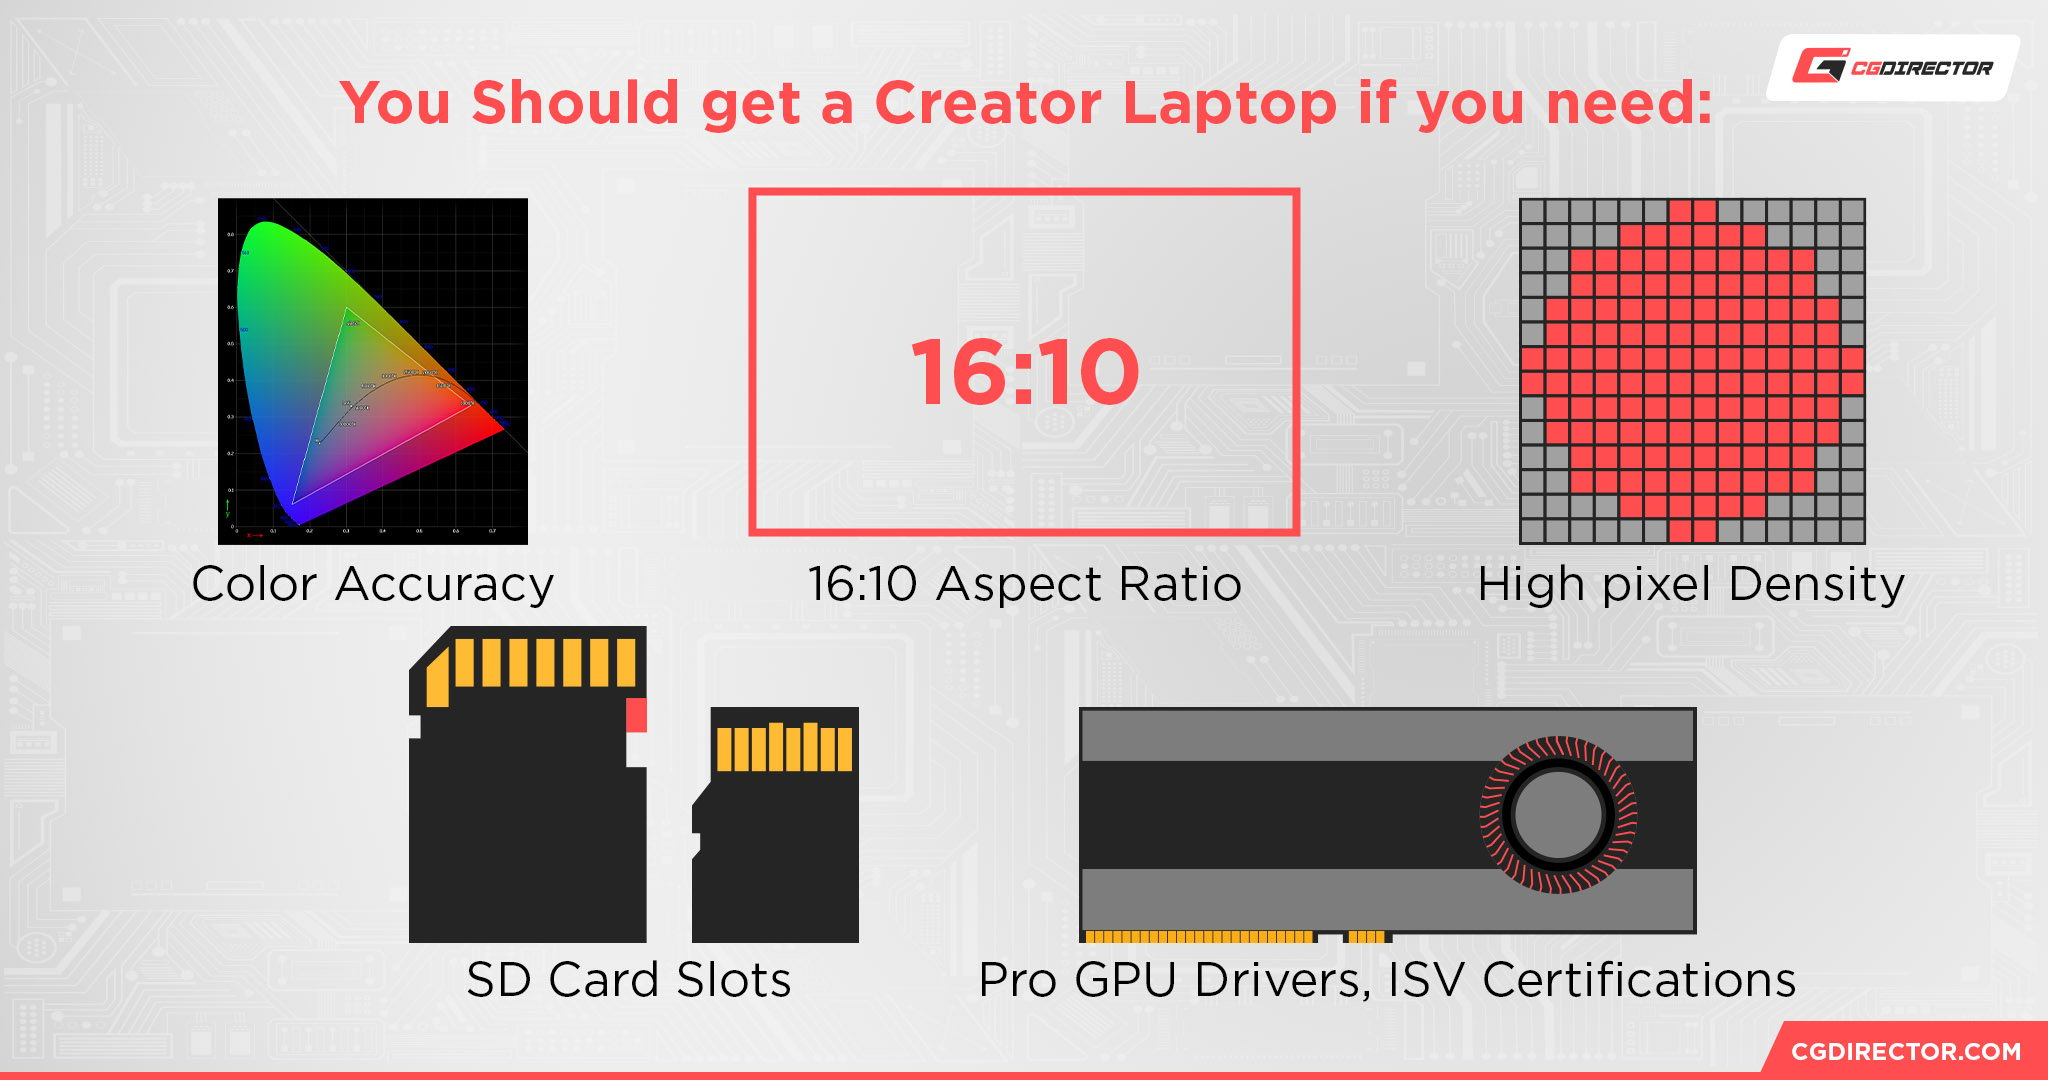 You Should get a Creator Laptop if you need